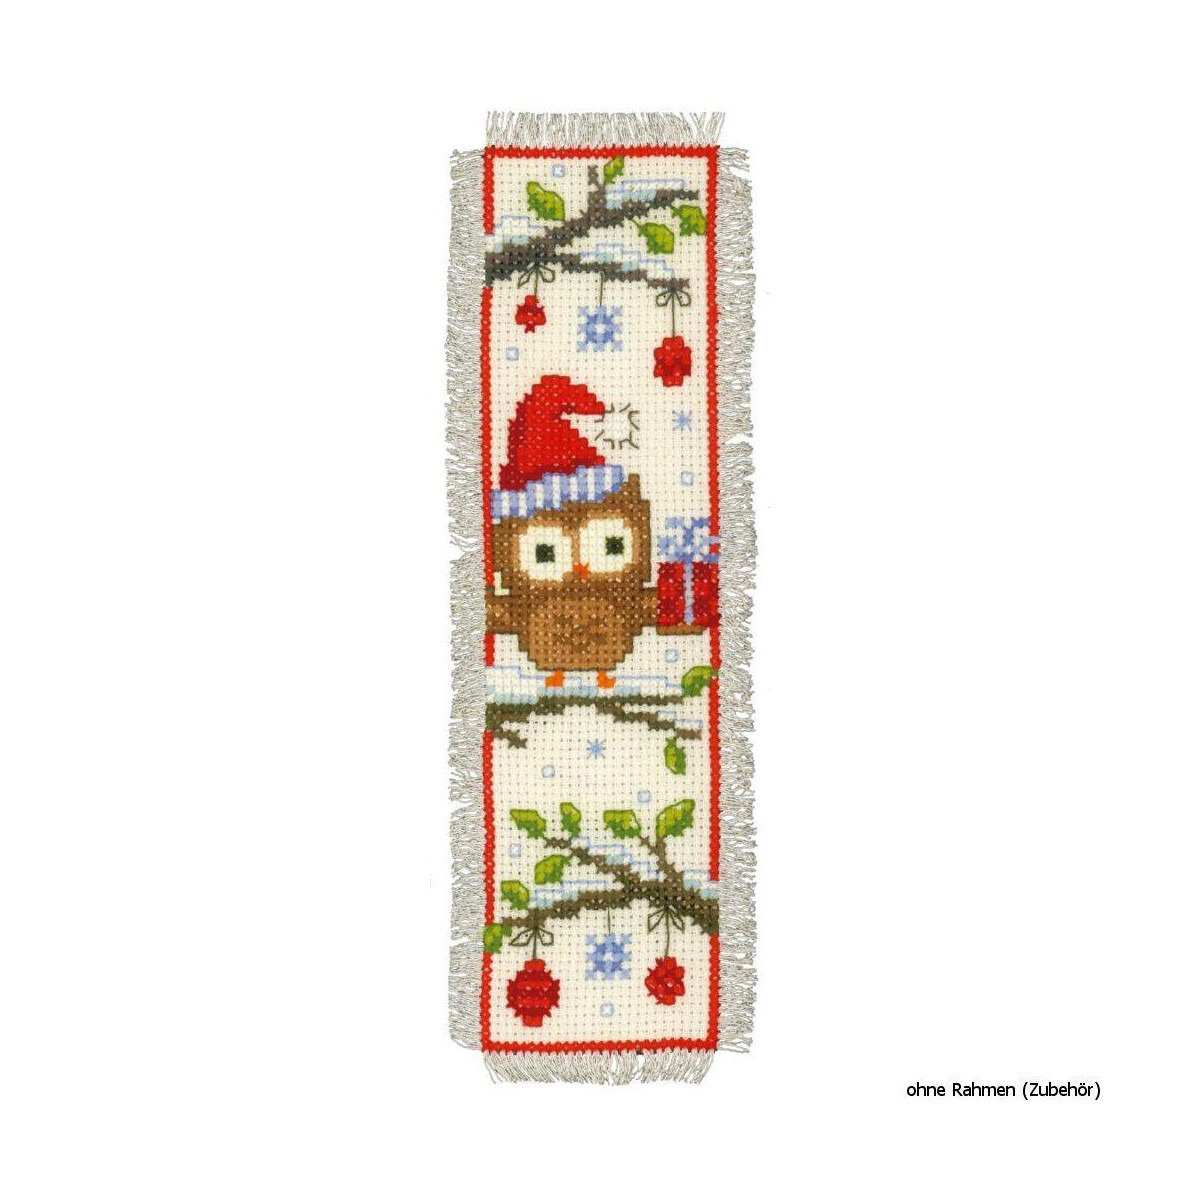 Vervaco Bookmark counted cross stitch kit Owls in Santa...